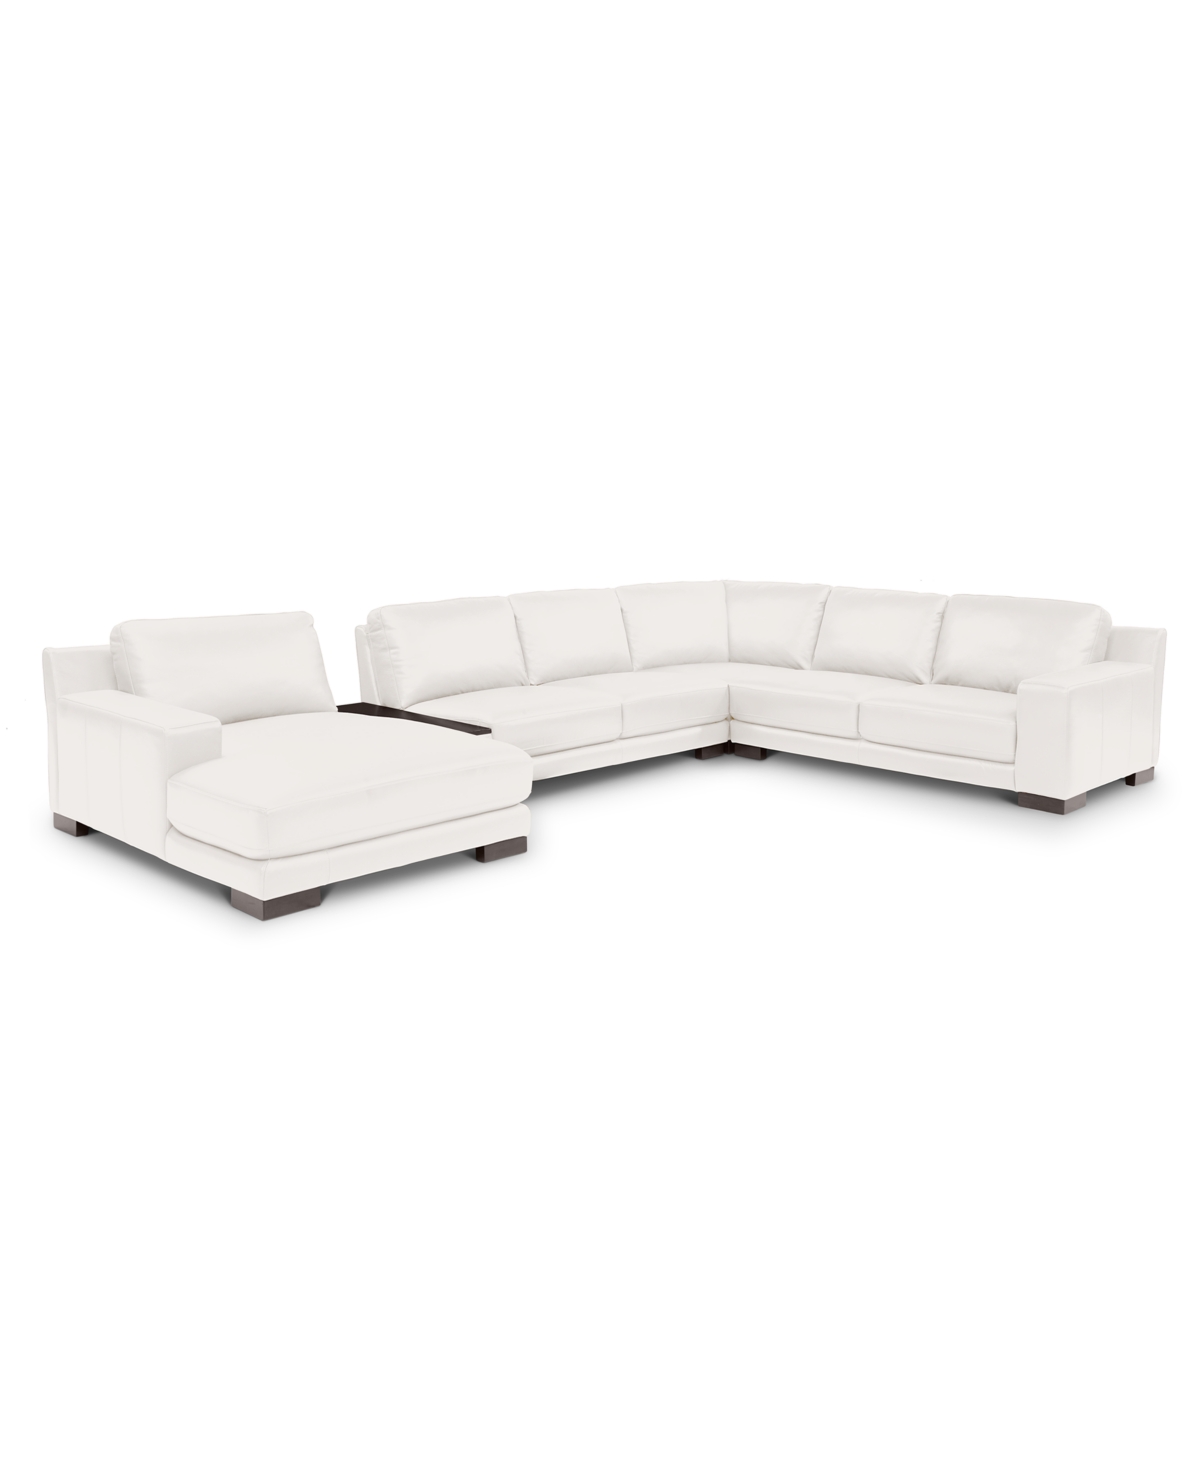 Macy's Darrium 5pc Leather Sectional With Console, Created For  In White